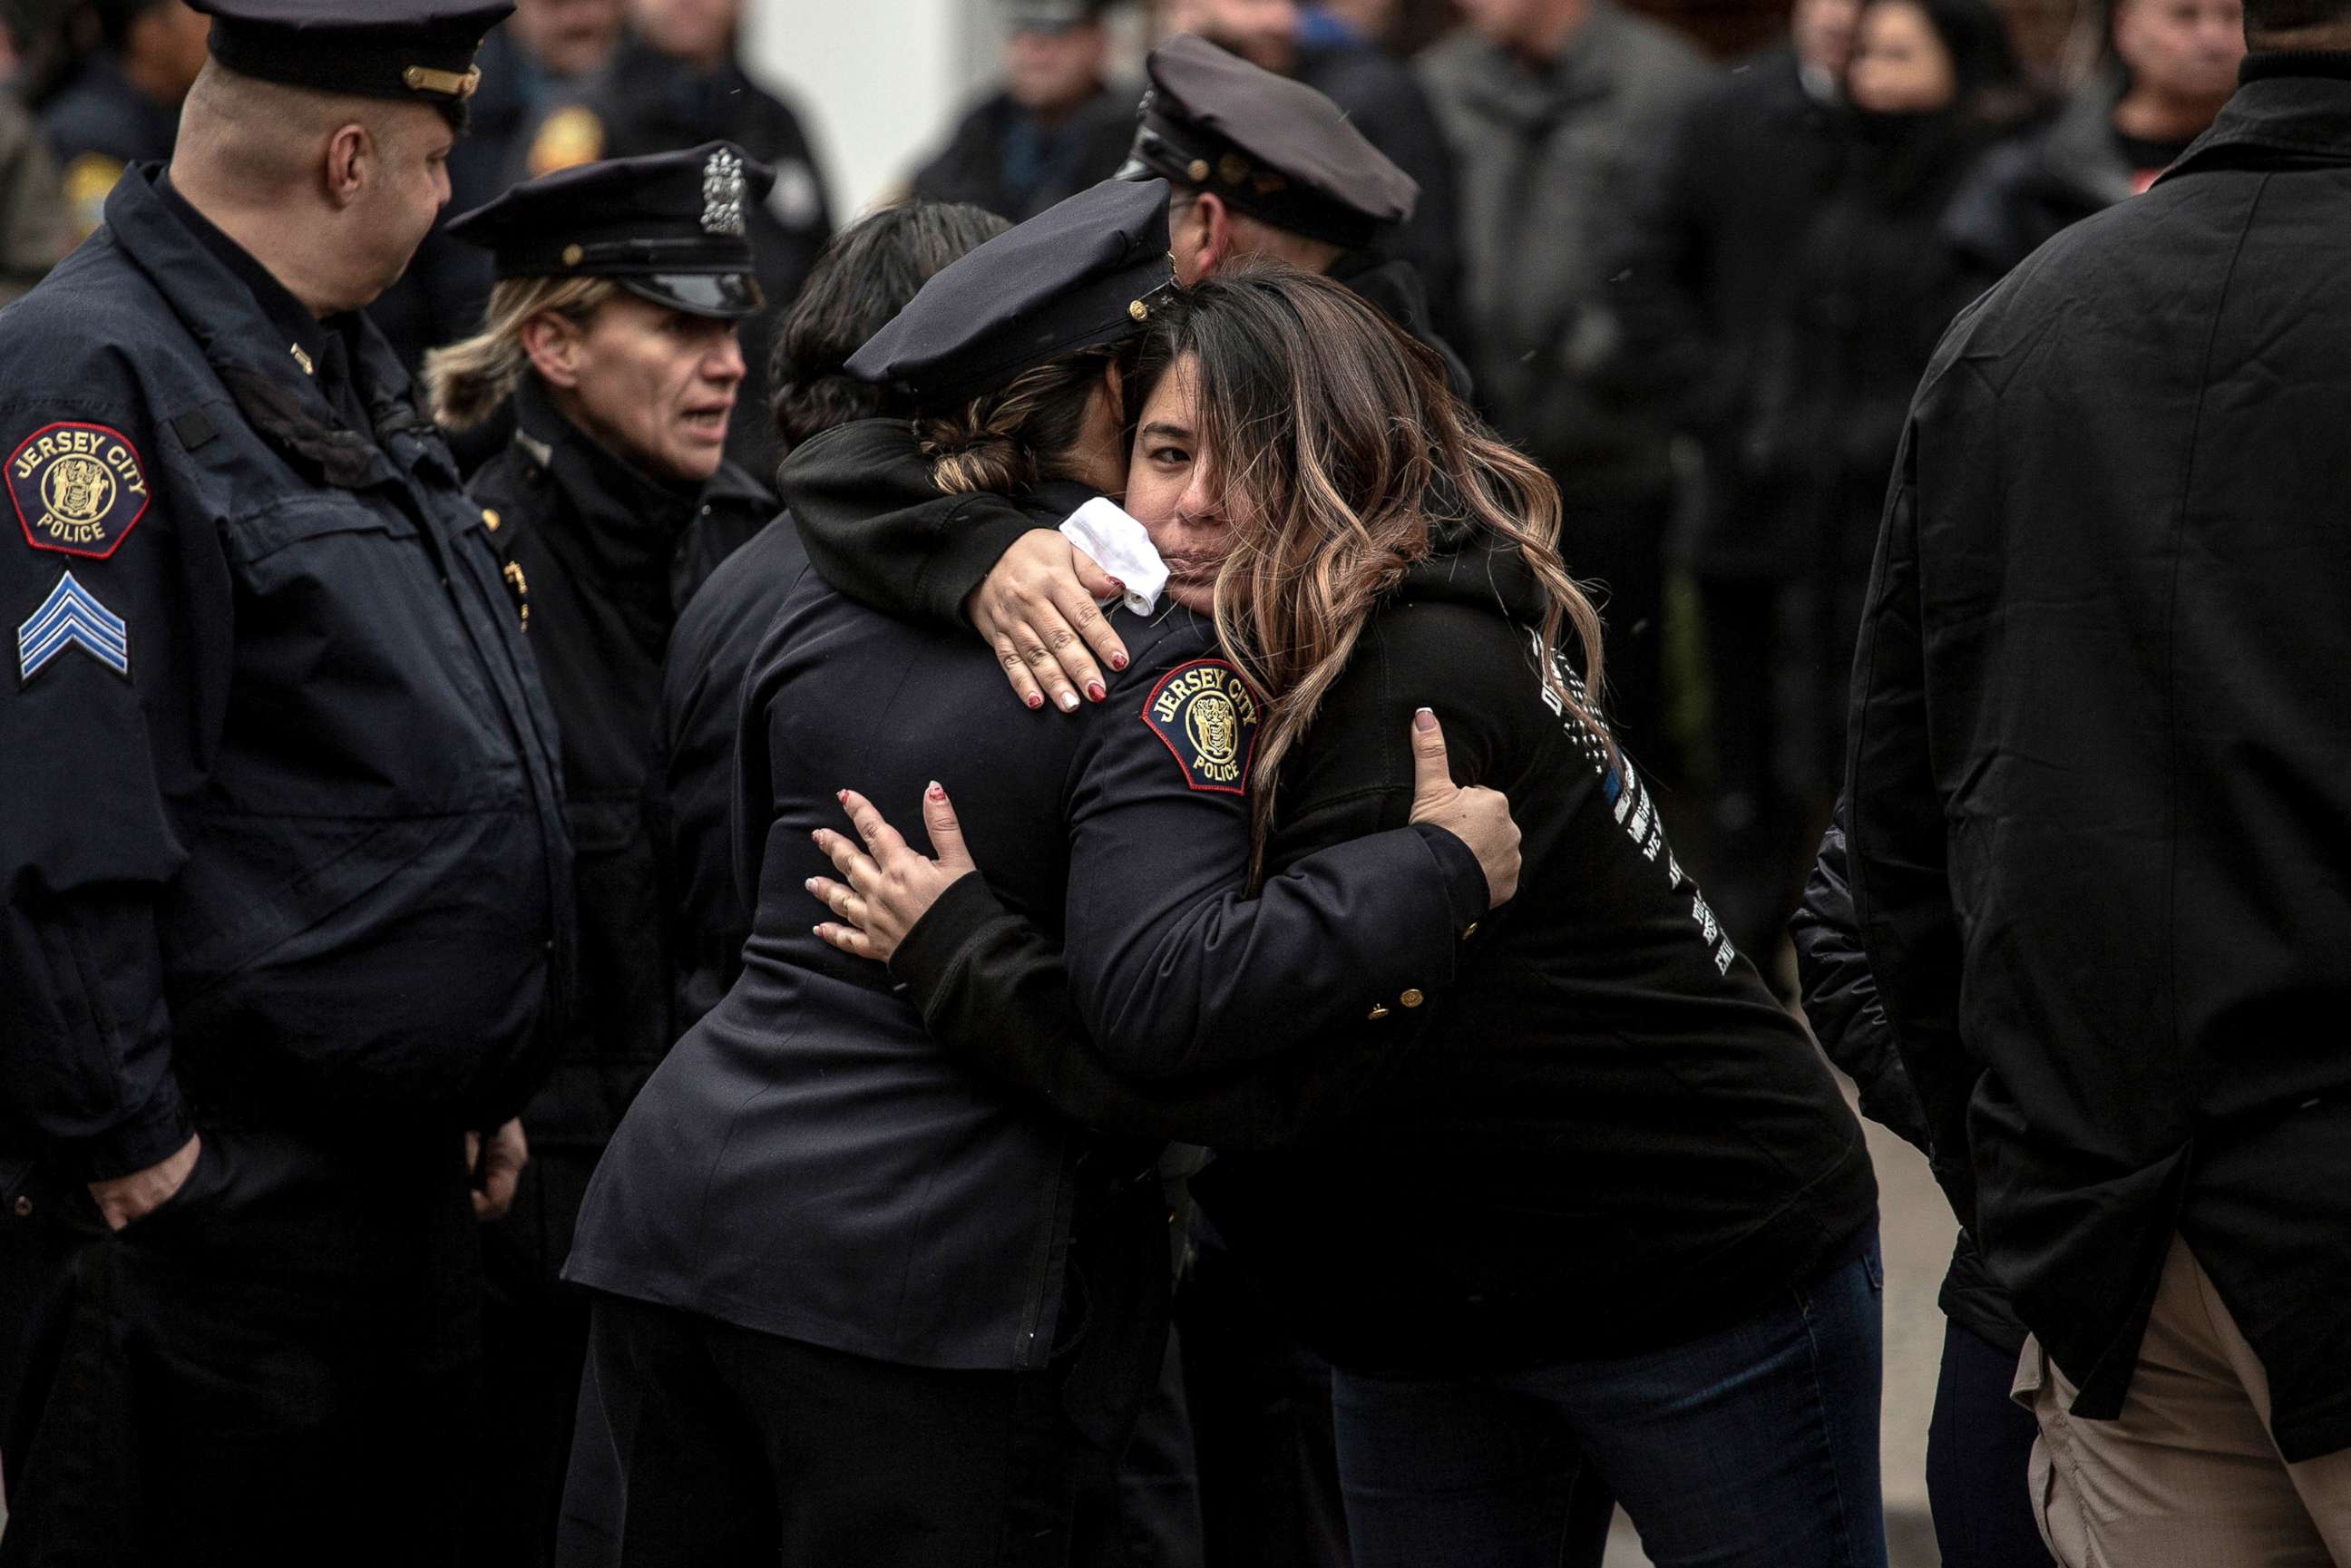 PHOTO: Mourners embrace during the wake for Detective Joseph Seals at McLaughlin Funeral Home in Jersey City, N.J., Dec. 16, 2019. 